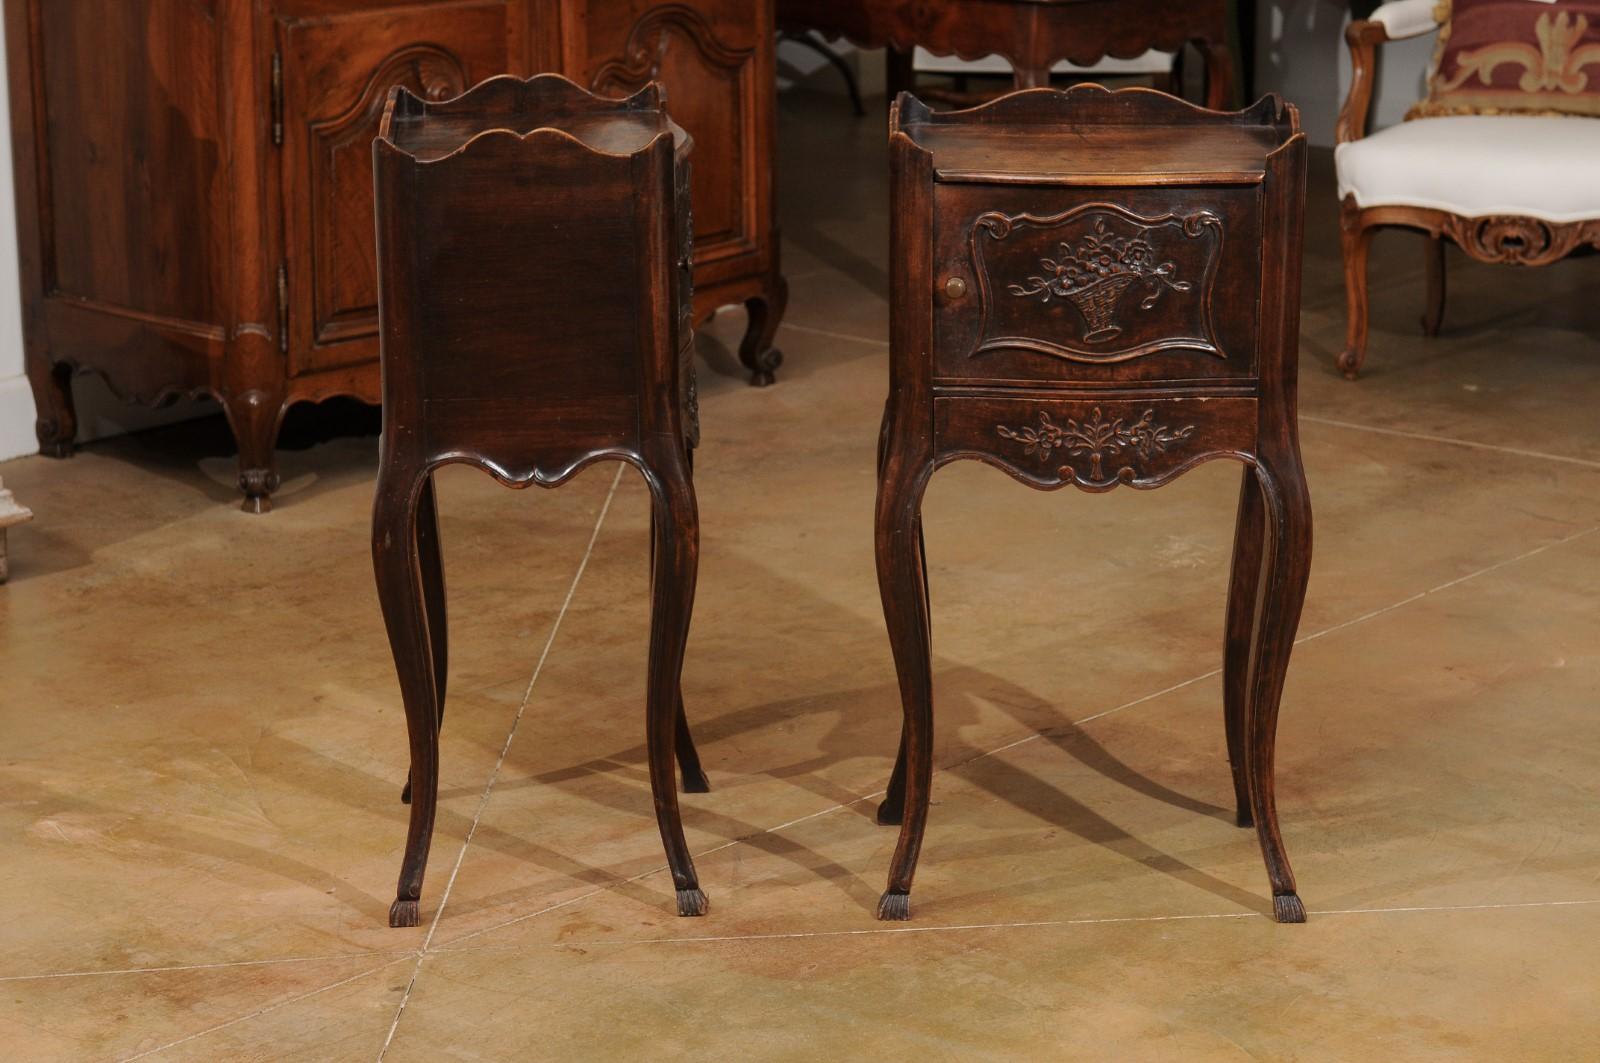 Pair of 19th Century French Carved Walnut Bedside Tables with Doors and Drawers 4